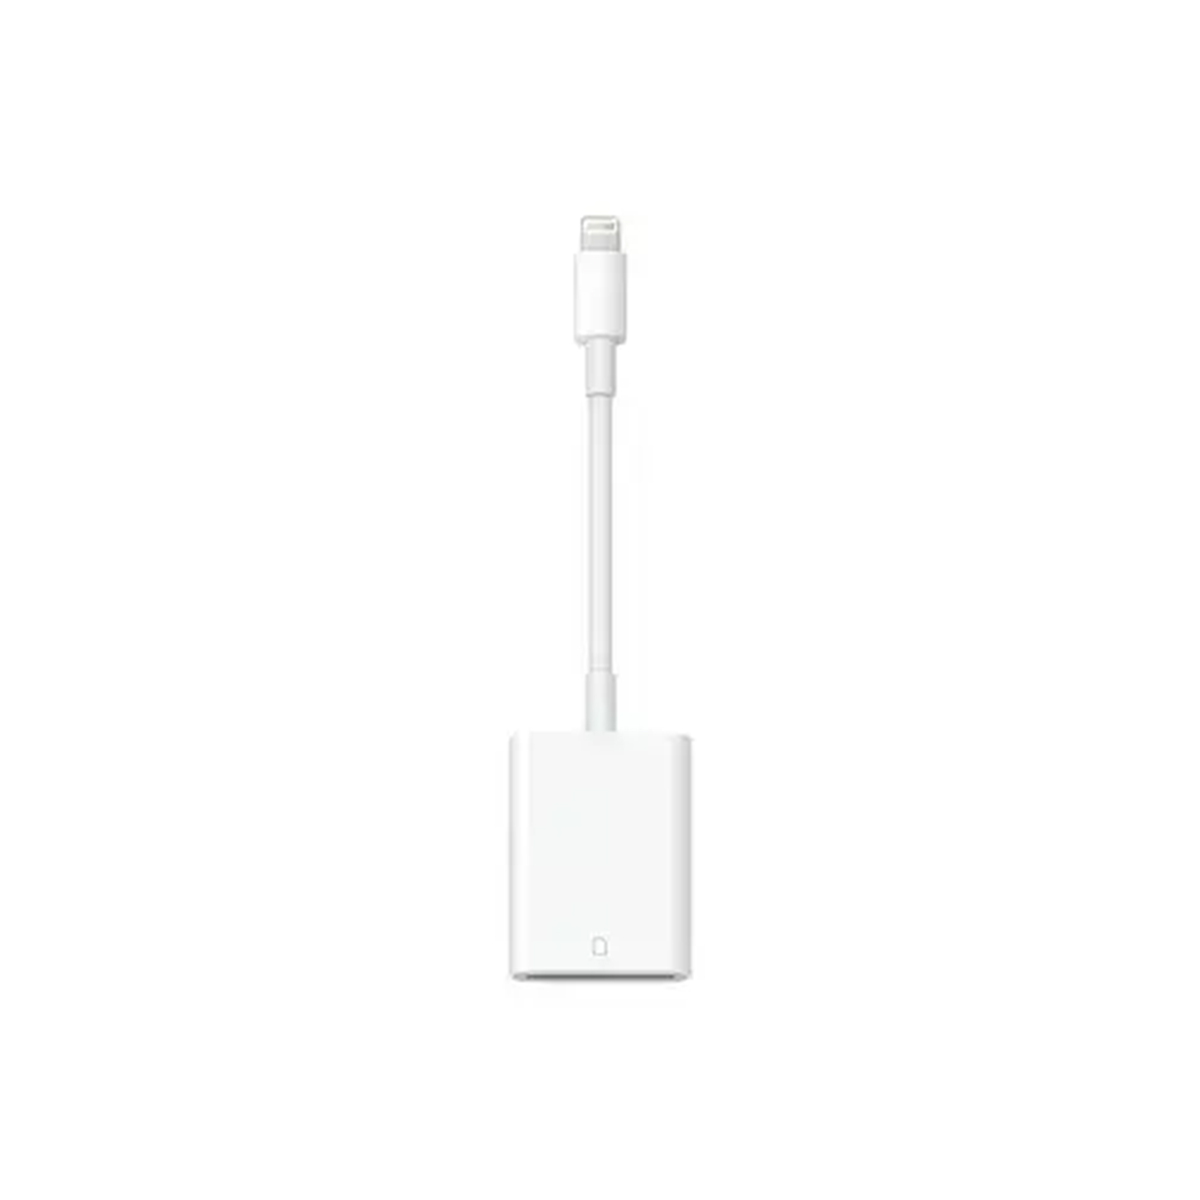 sd card reader iphone - Best Buy